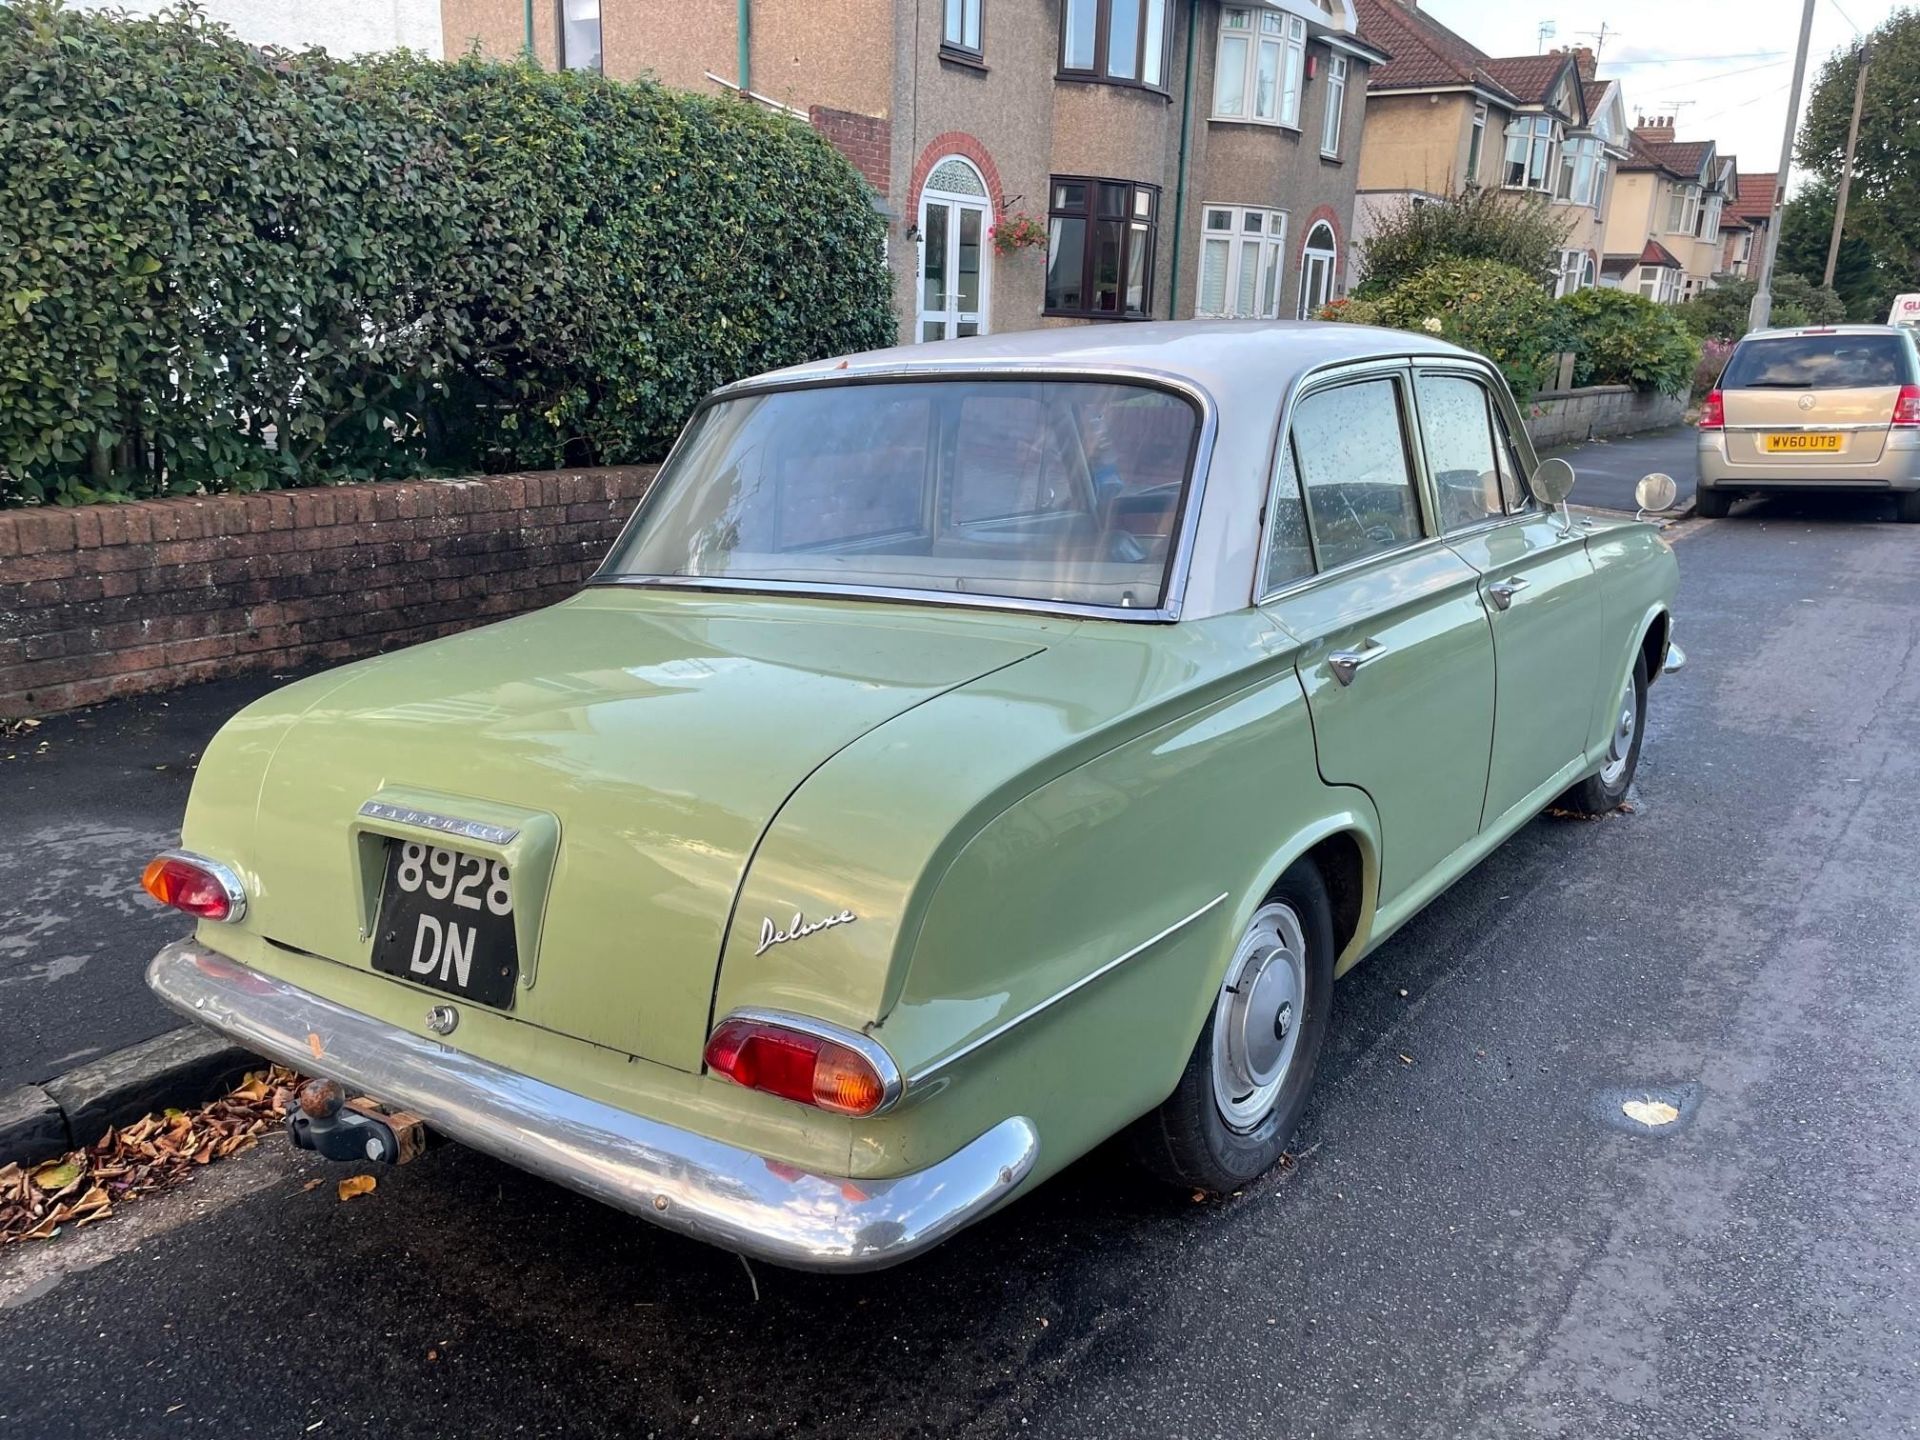 1963 Vauxhall Victor FB30 Registration number 8928 DN Green with grey leather interior Vauxhall - Image 13 of 13